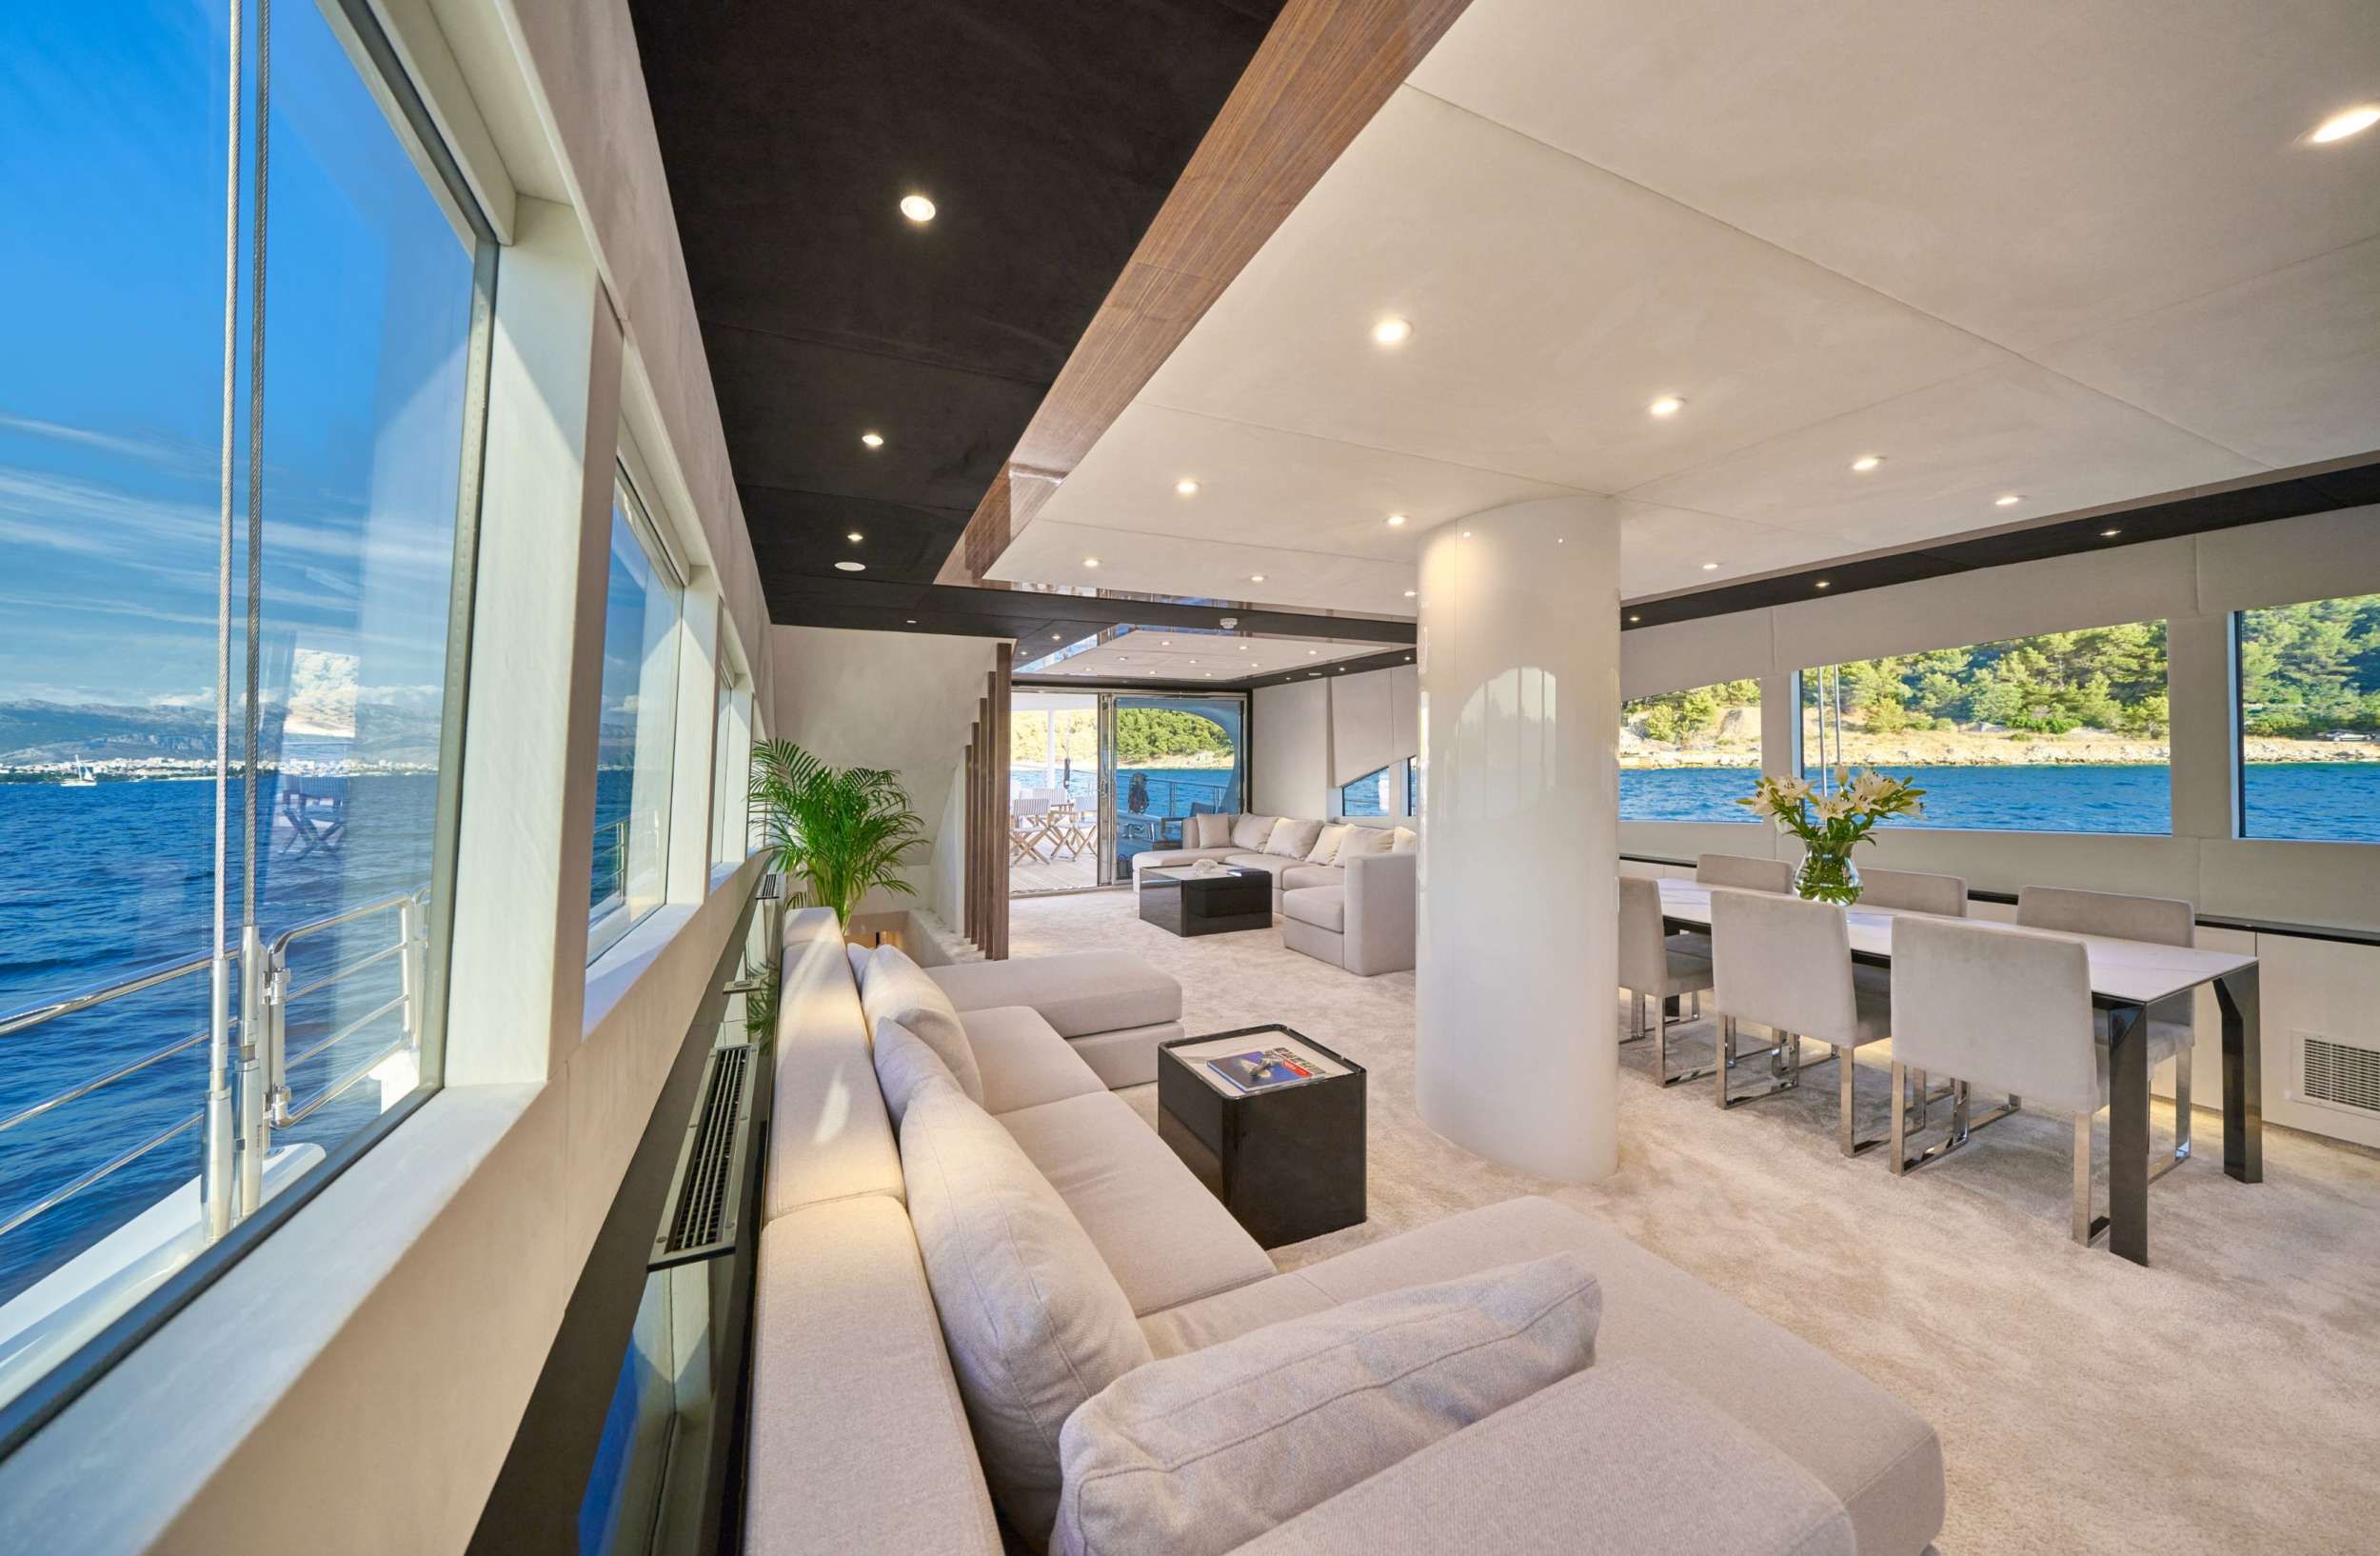 ACAPELLA Yacht Charter - Main Salon and Dining